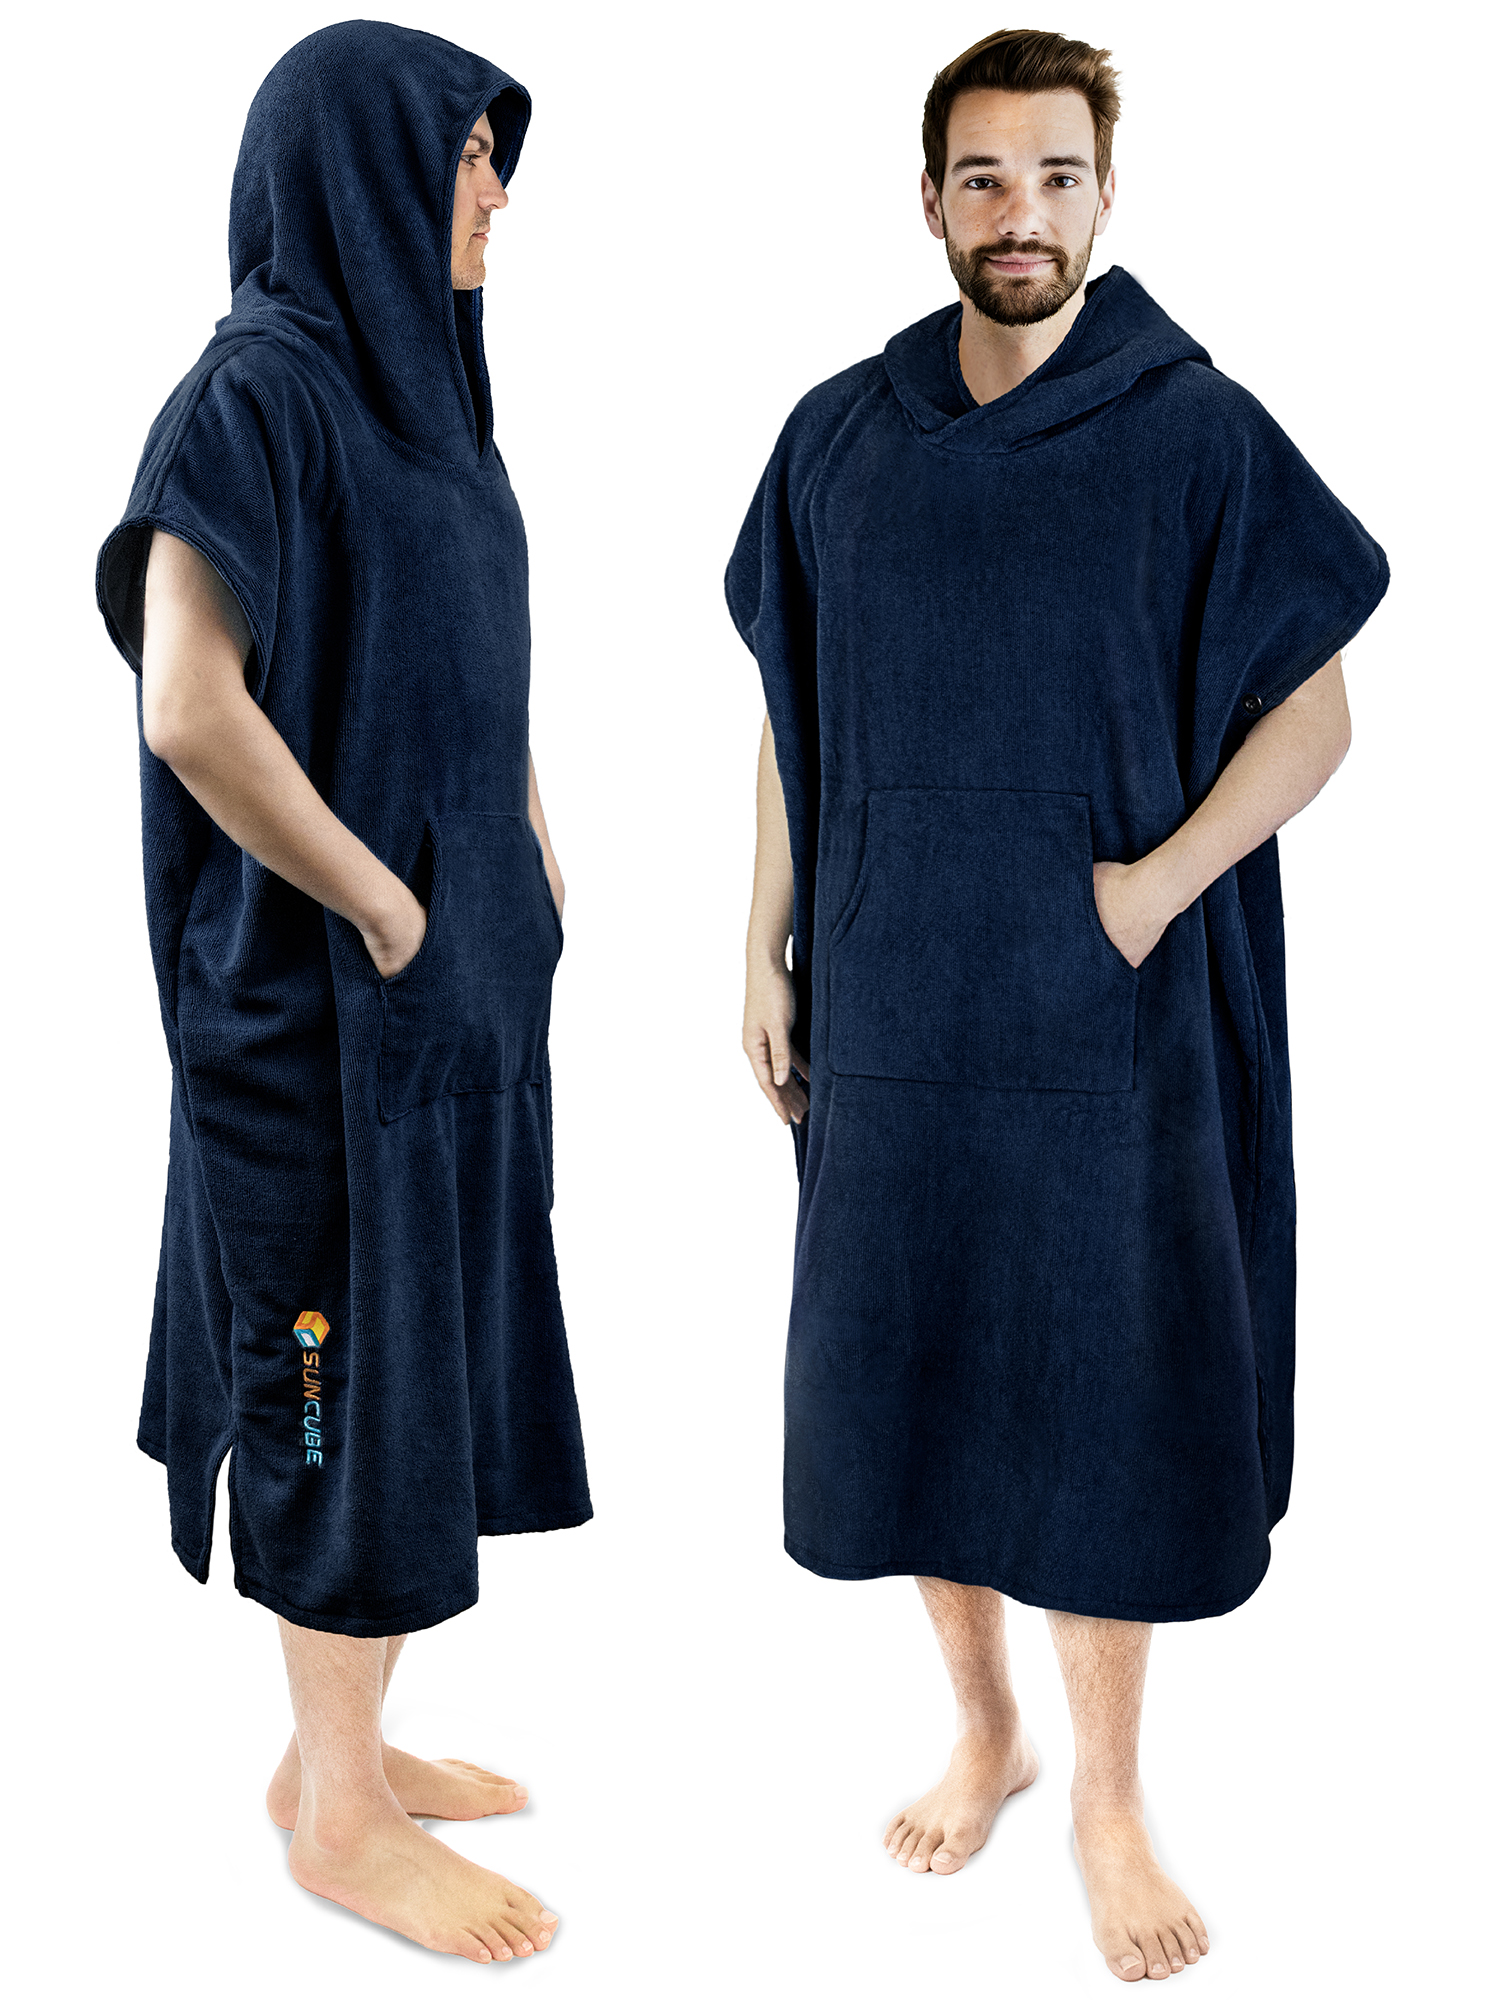 Surf Poncho Changing Towel Robe for Adults Men Women, Hooded